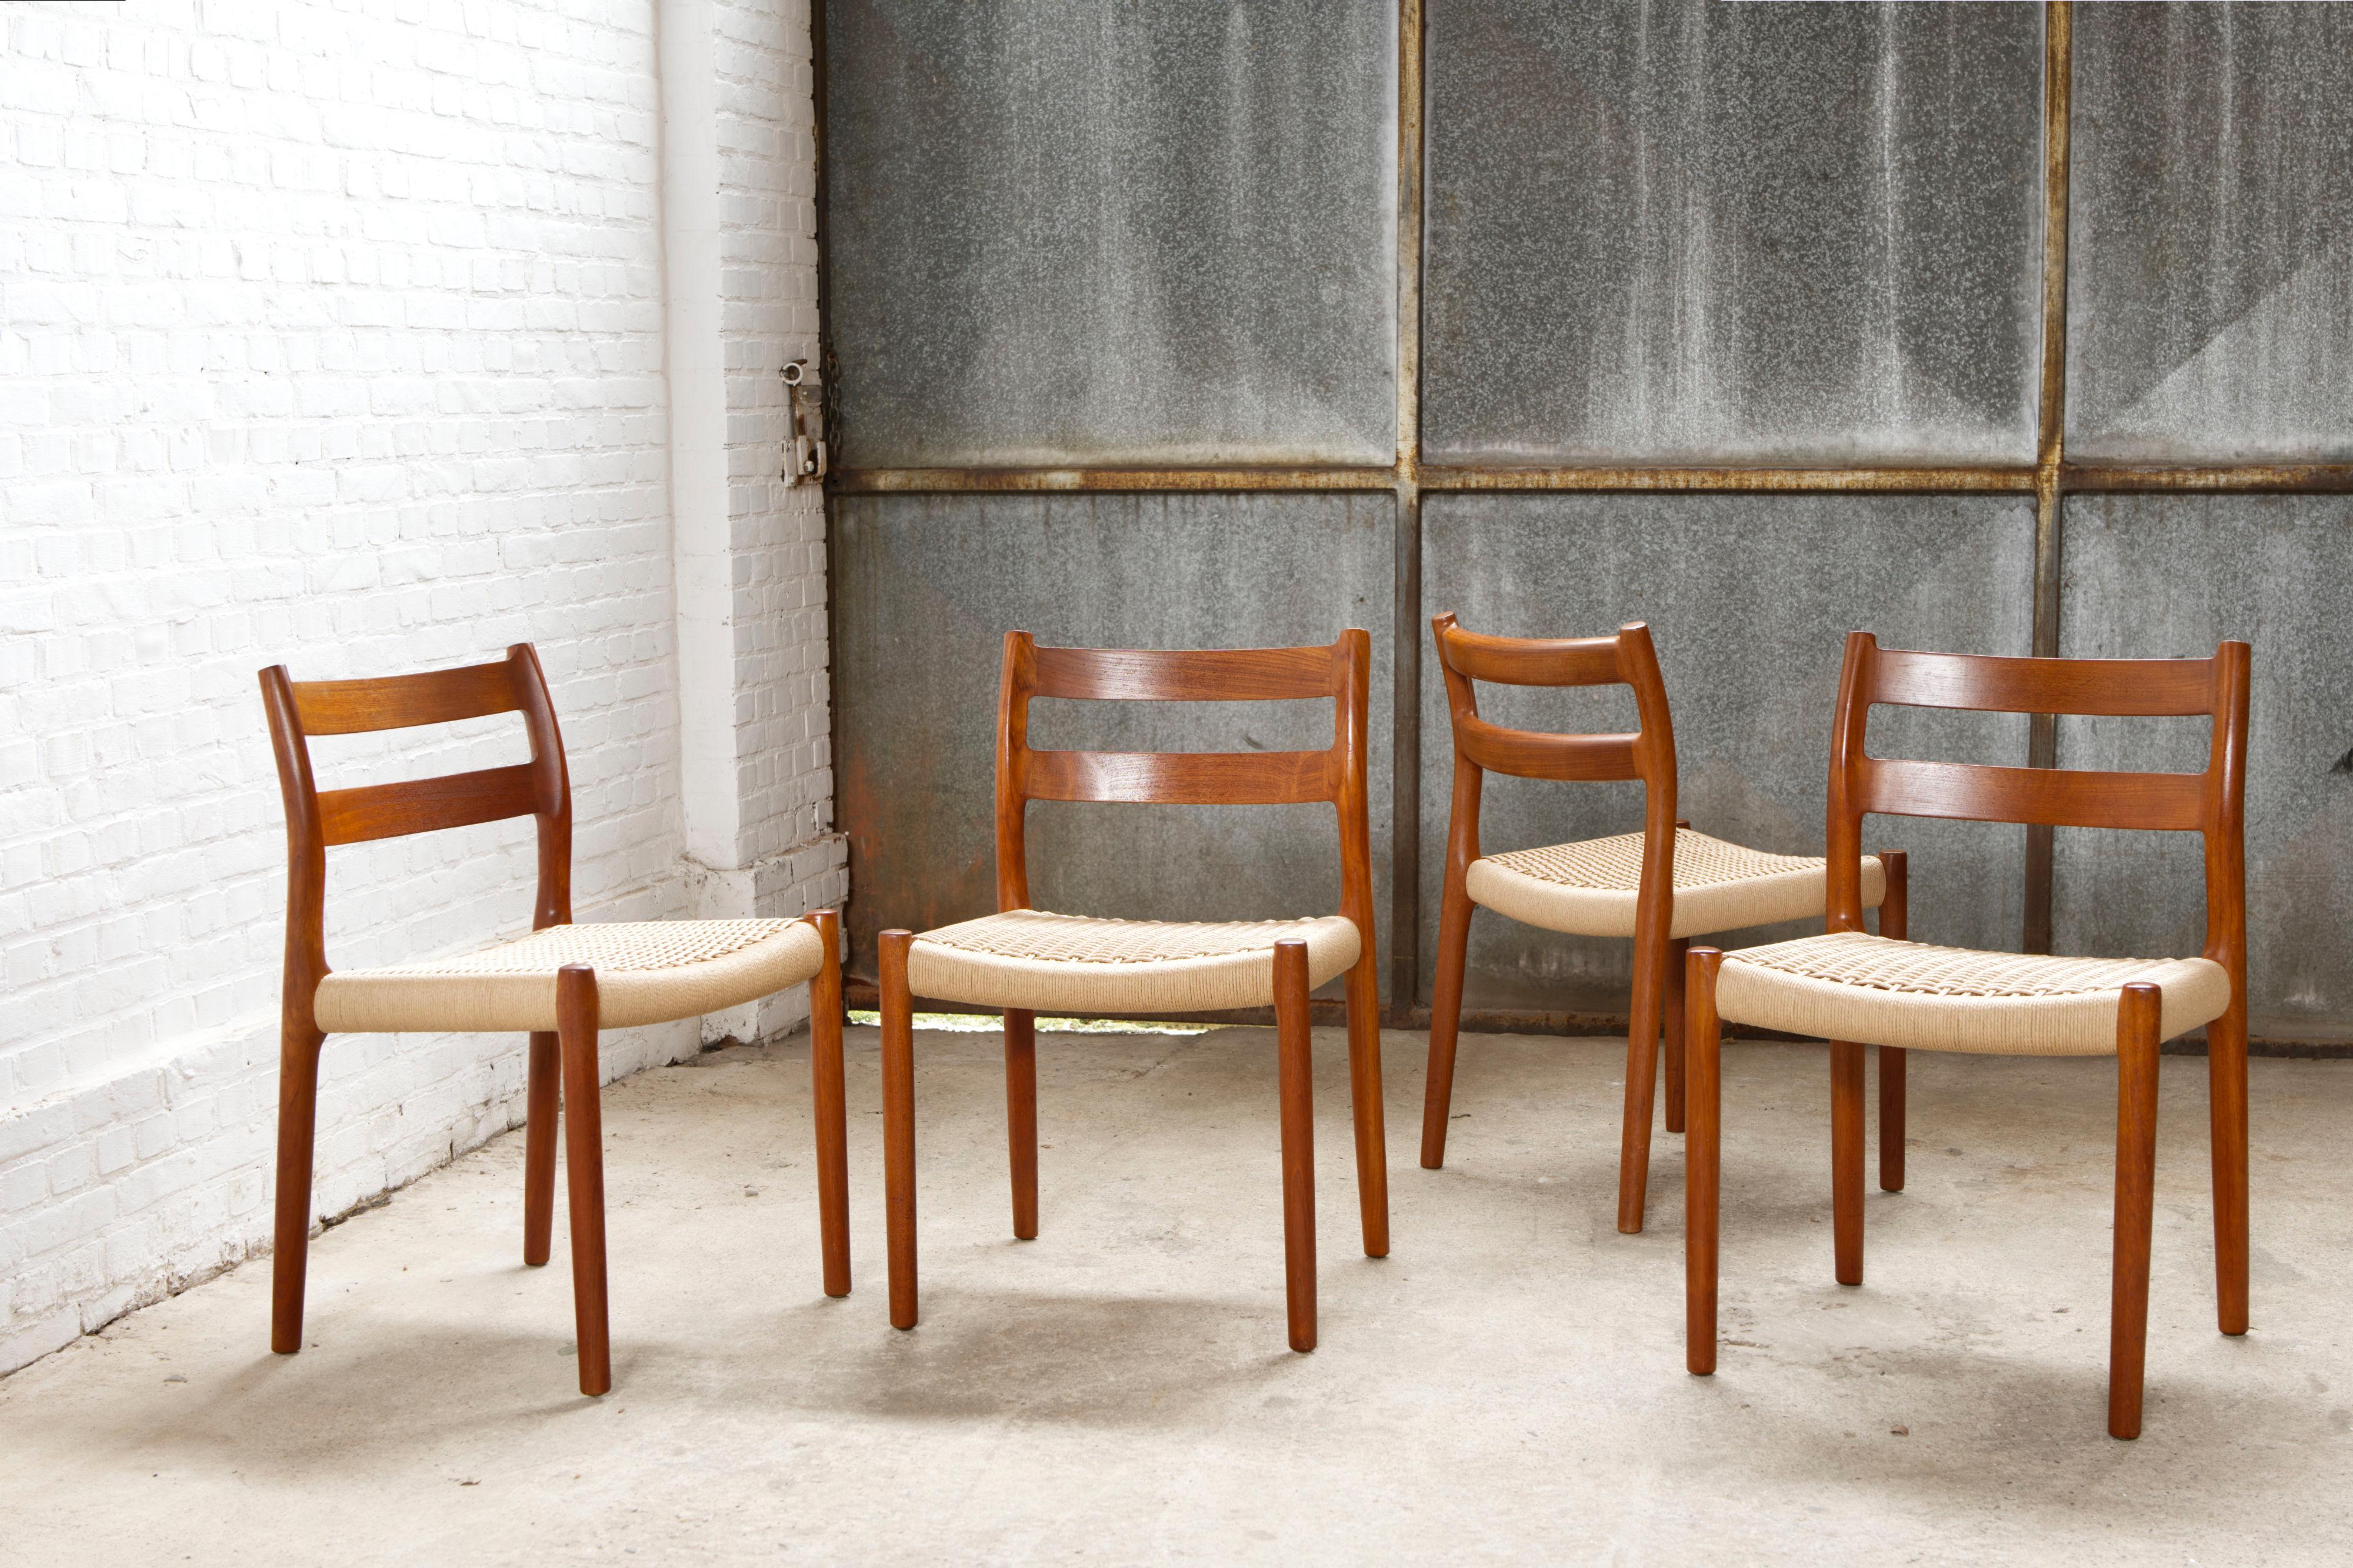 A beautiful organically shaped set of 4 dining chairs by Niels Otto Møller, 'model 84' in teak. The chairs are a well-known Danish classic by furniture designer and maker Niels Otto Møller.

This set has beautifully wood grain and is fitted with